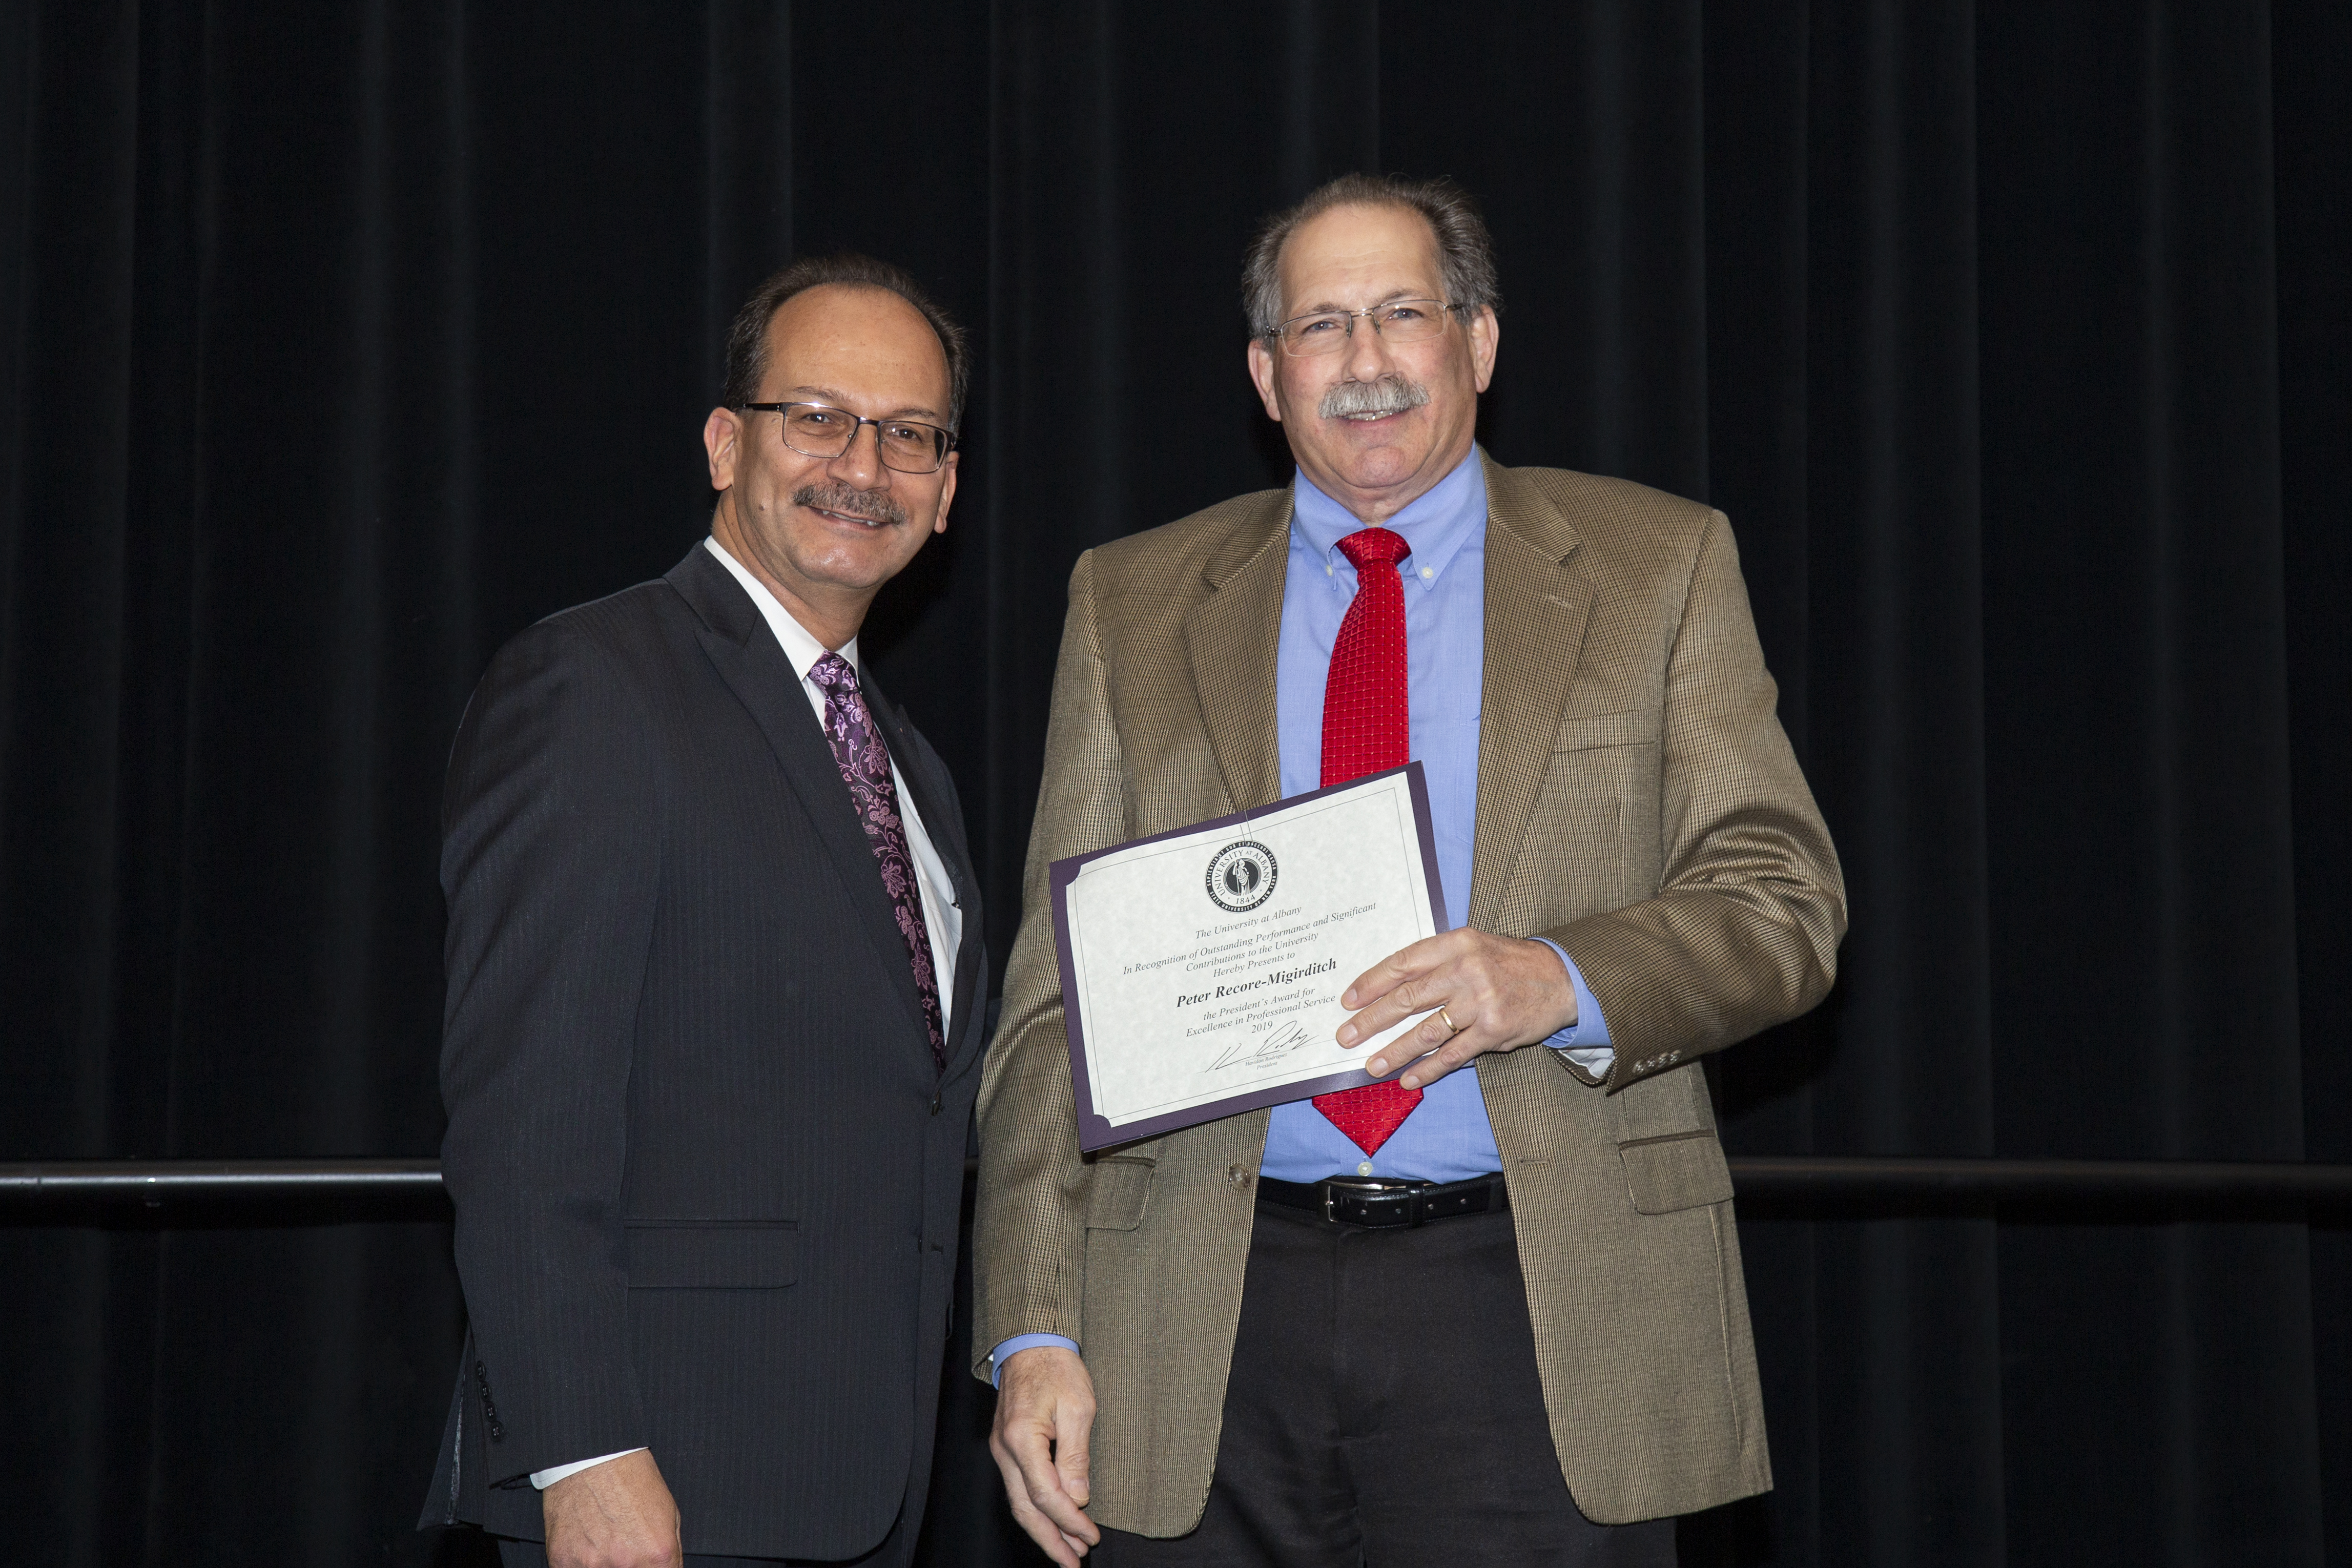 President Rodriguez (left) and Peter Recore-Migirditch (right) at an awards ceremony